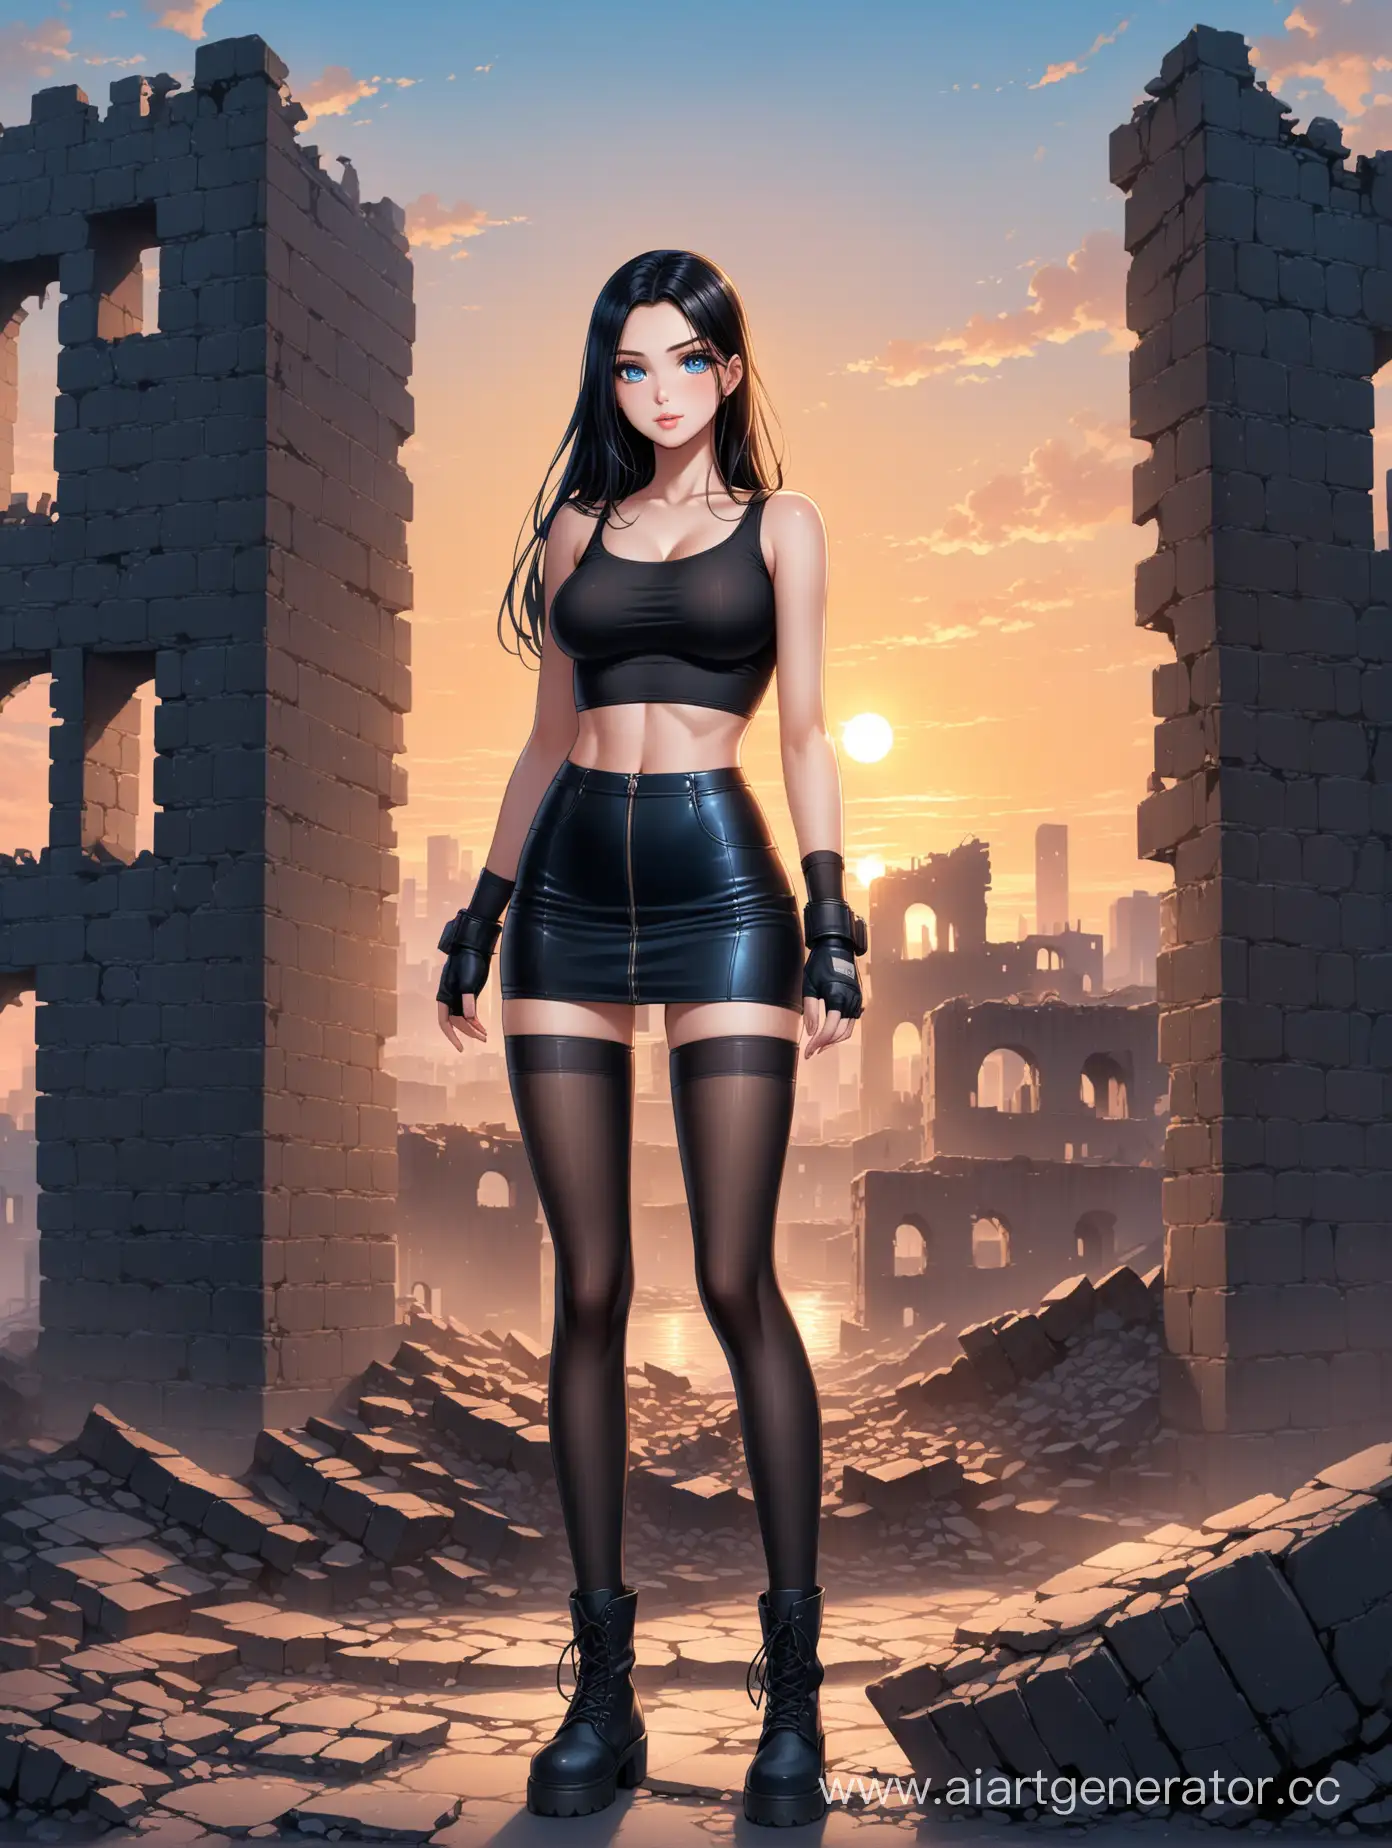 Stunning tall girl character in realistic style (long black hair, big expressive skyblue eyes, cute face), hot luscious lips, full 180cm body, slender fit figure (slim waist, wide hips, medium breasts), beautiful long trained legs. Wearing tight black top, darkblue mini skirt, transparent stockings, black combat boots, fingerless gloves. Stands in the city ruins at the sunset. Full body image.